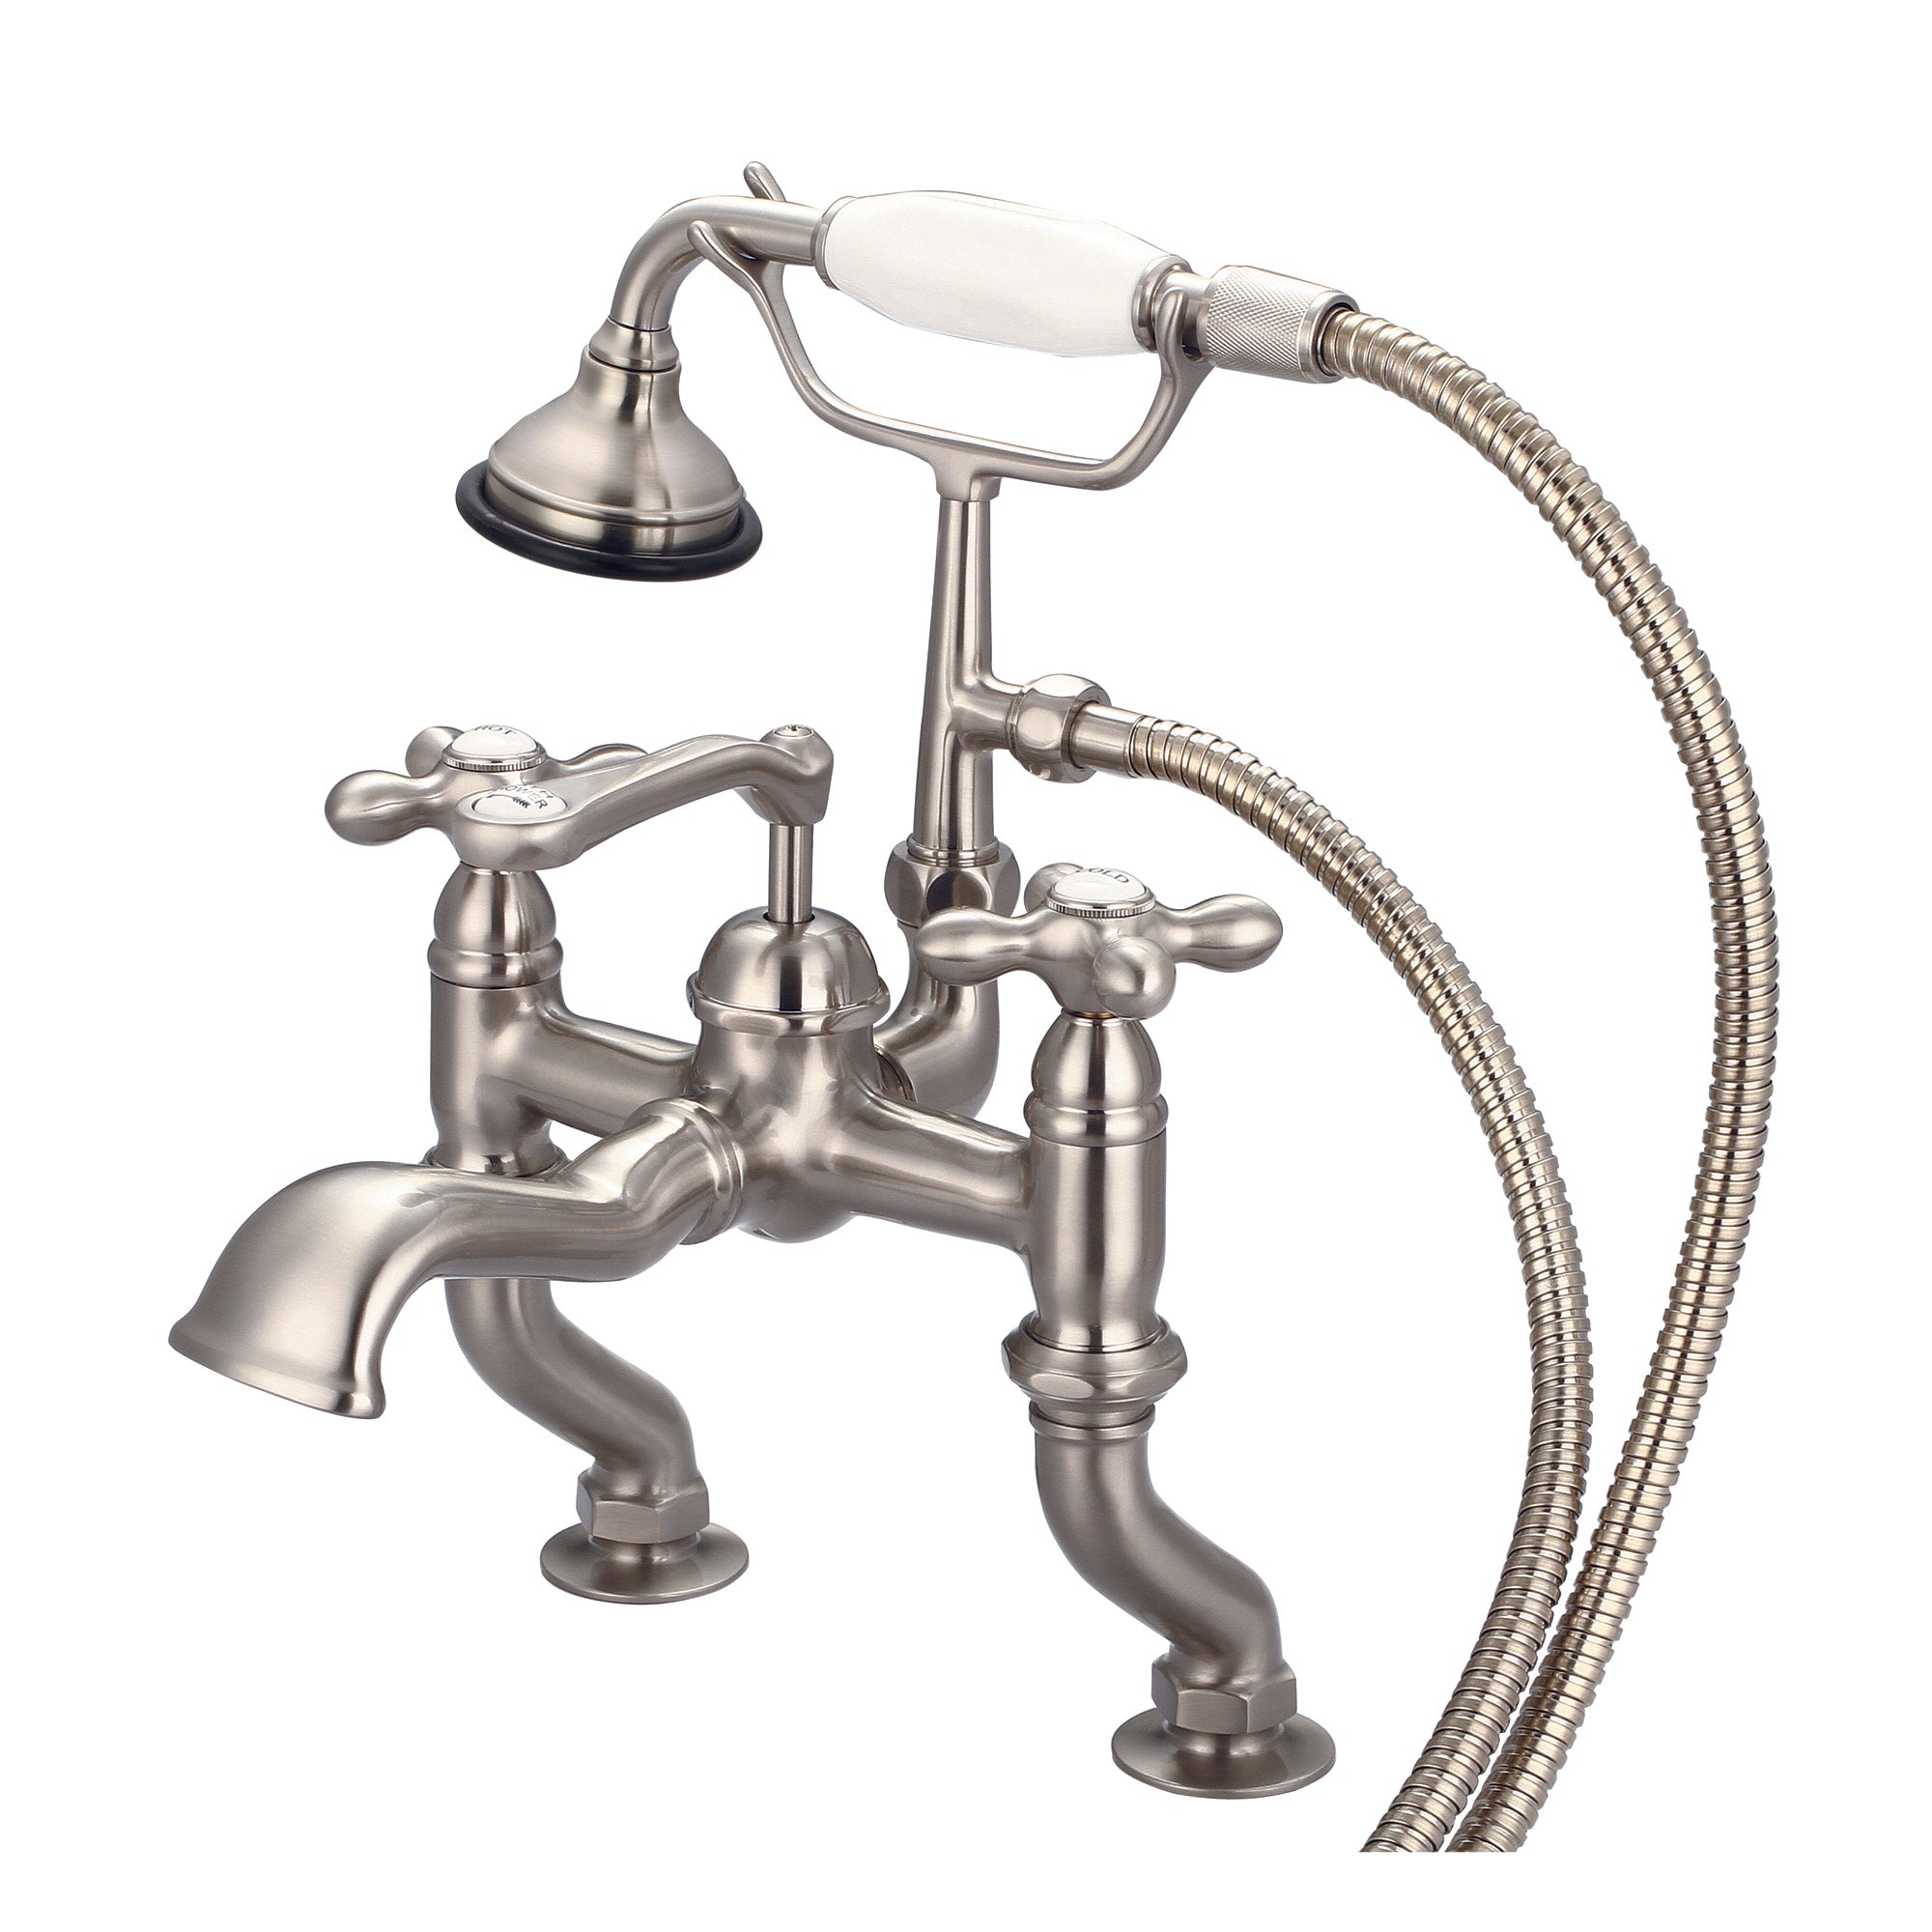 Water Creation | Vintage Classic Adjustable Center Deck Mount Tub Faucet With Handheld Shower in Brushed Nickel Finish With Metal Lever Handles, Hot And Cold Labels Included | F6-0004-02-AX